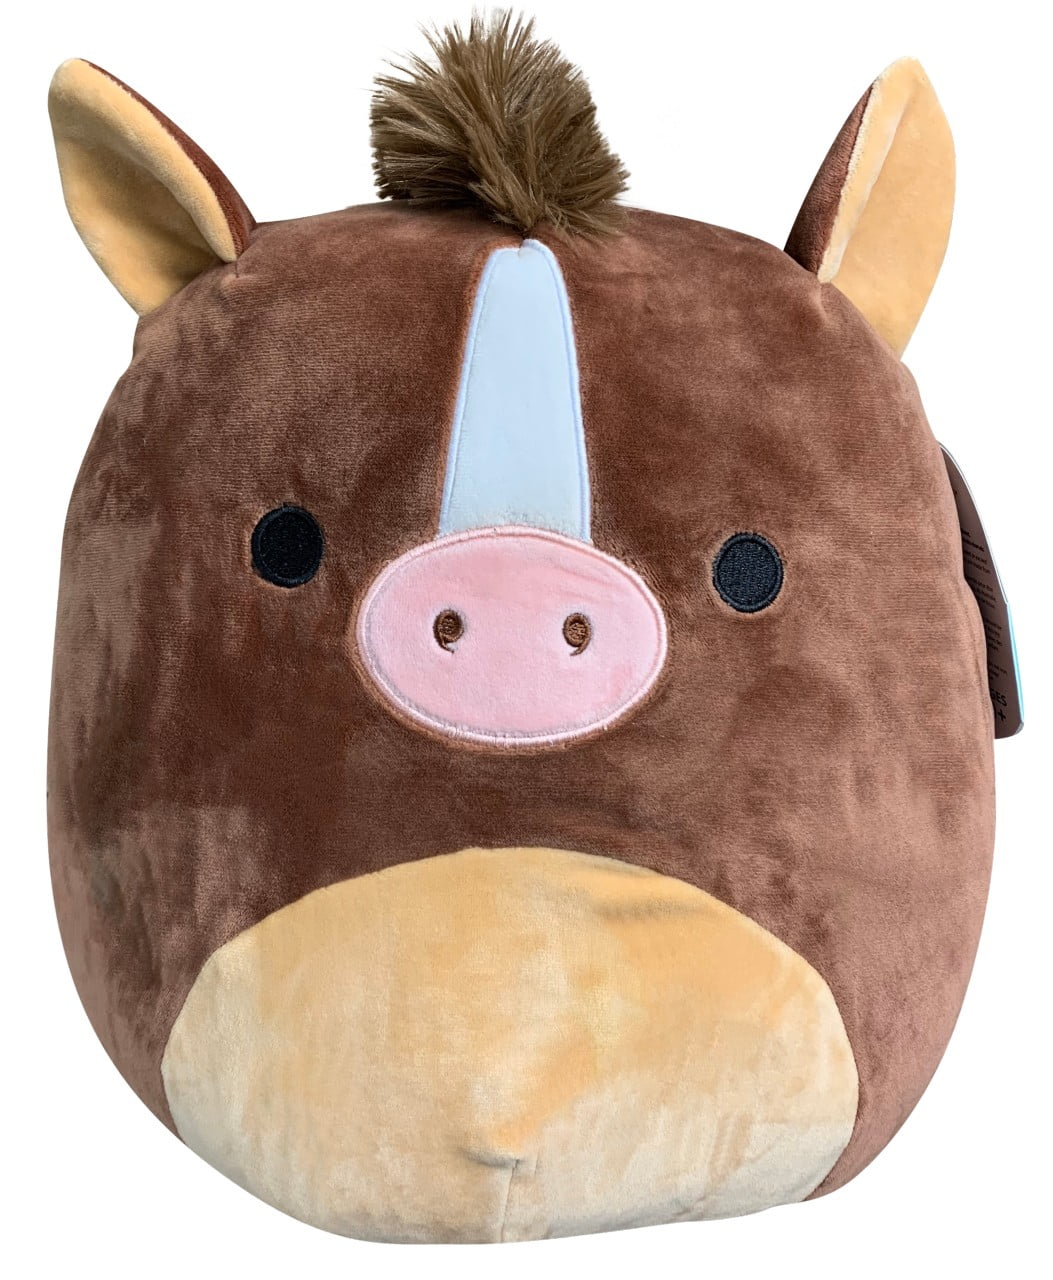 Details about   NEW BRISBY HORSE 2021 STACKABLE SQUISHMALLOW 12" PLUSH ANIMAL GIFT PILLOW 